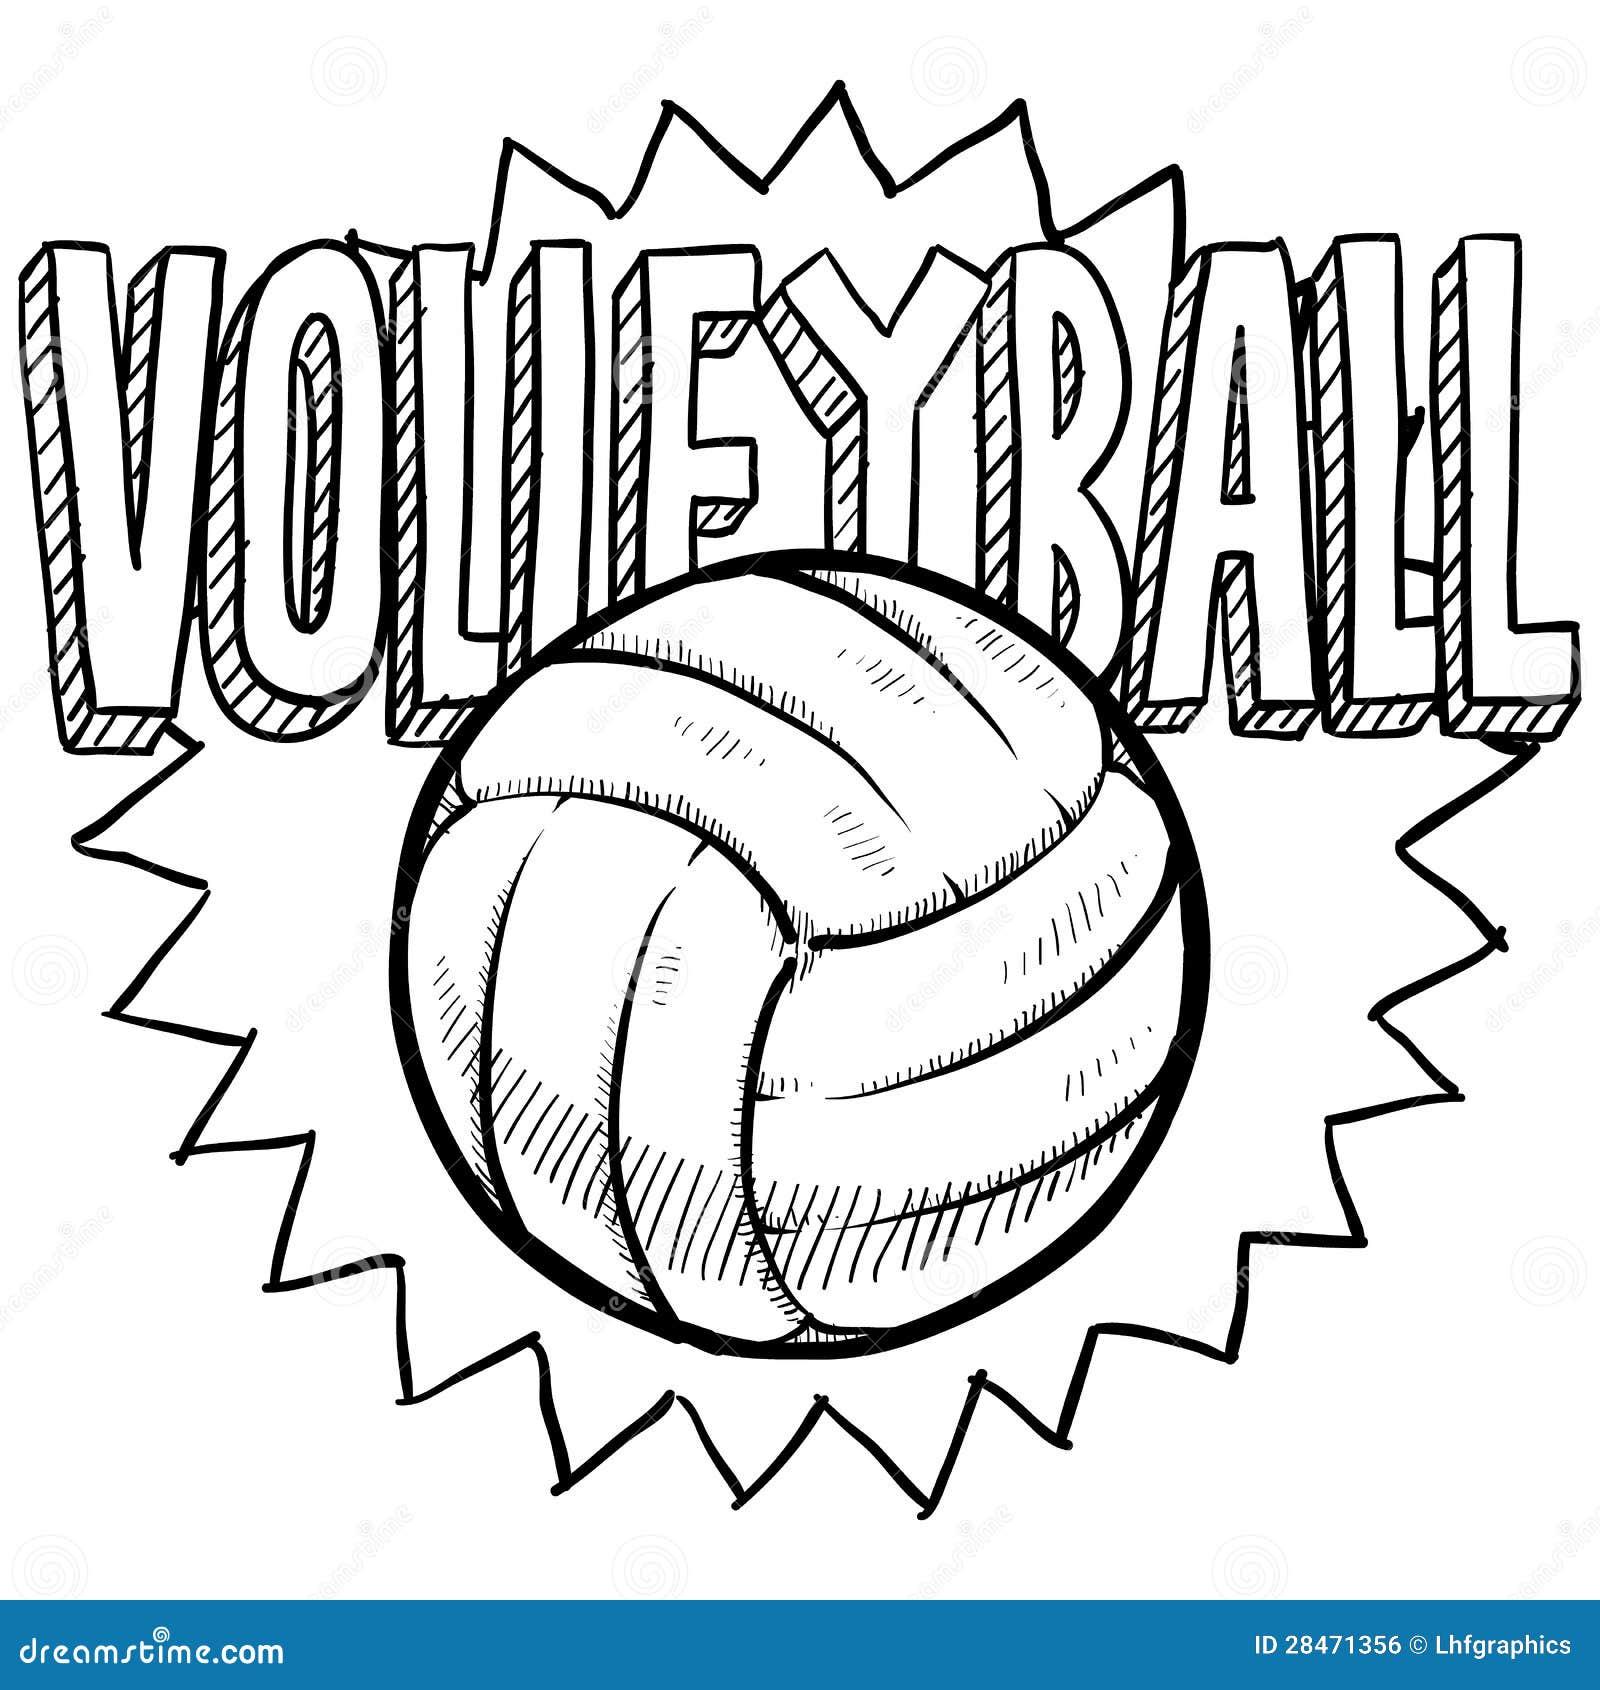 Volleyball sketch stock vector illustration of drawing